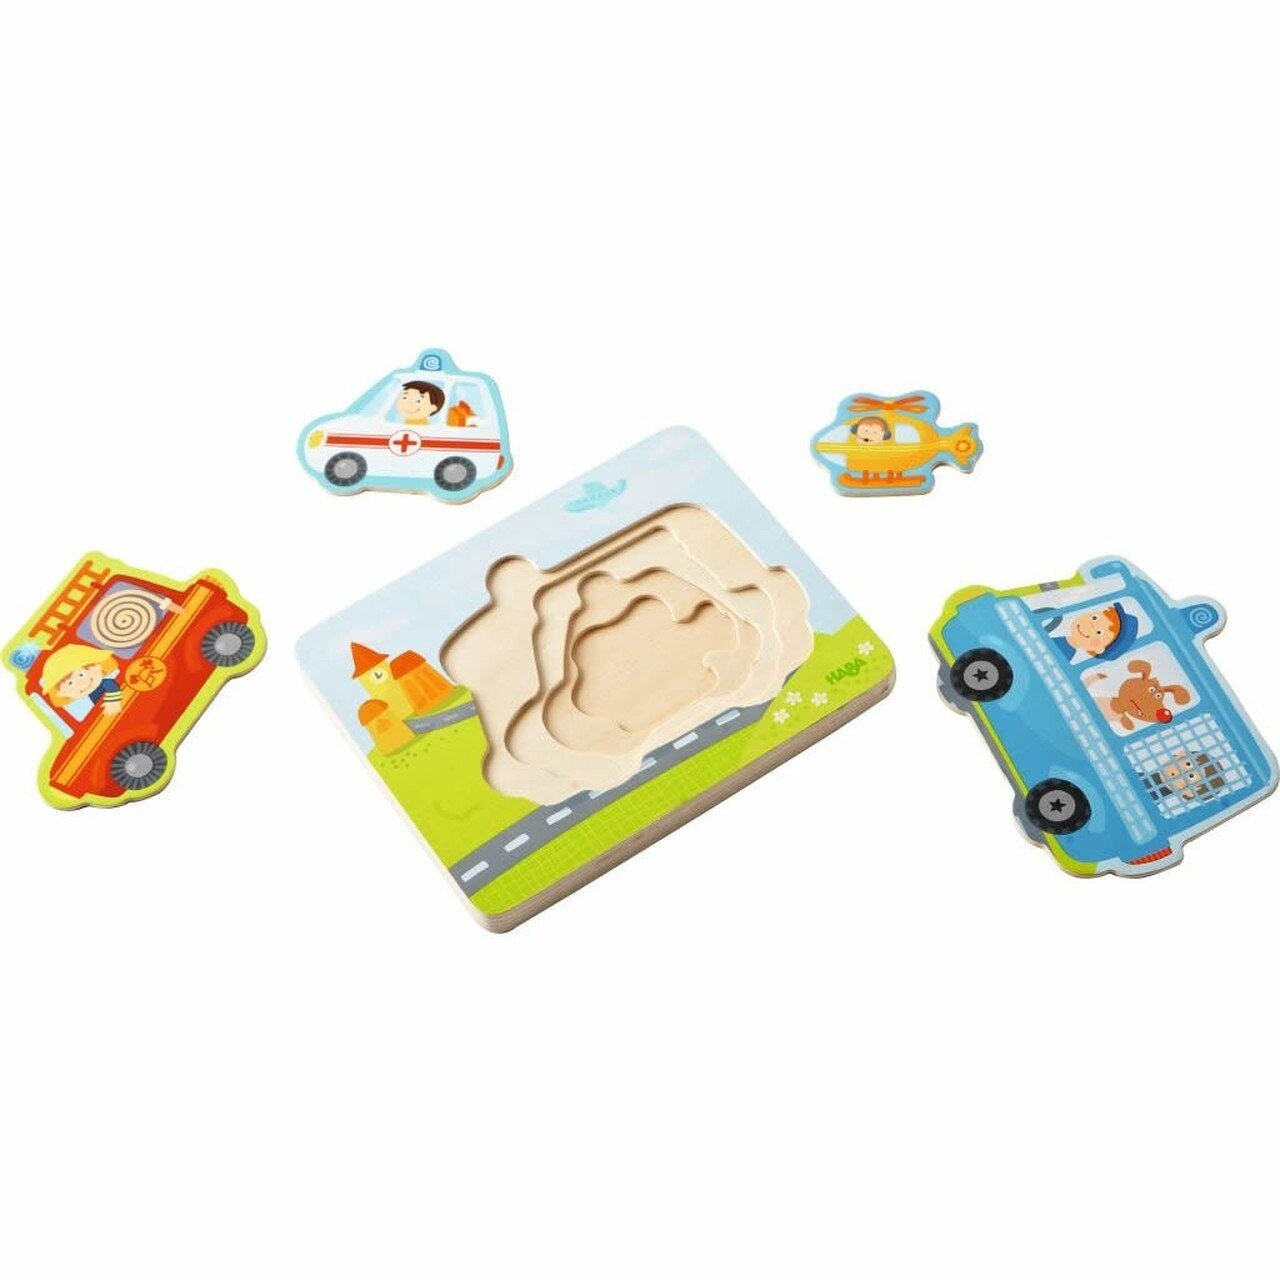 HABA Wooden Puzzle Emergency Call - Wood Wood Toys Canada's Favourite Montessori Toy Store